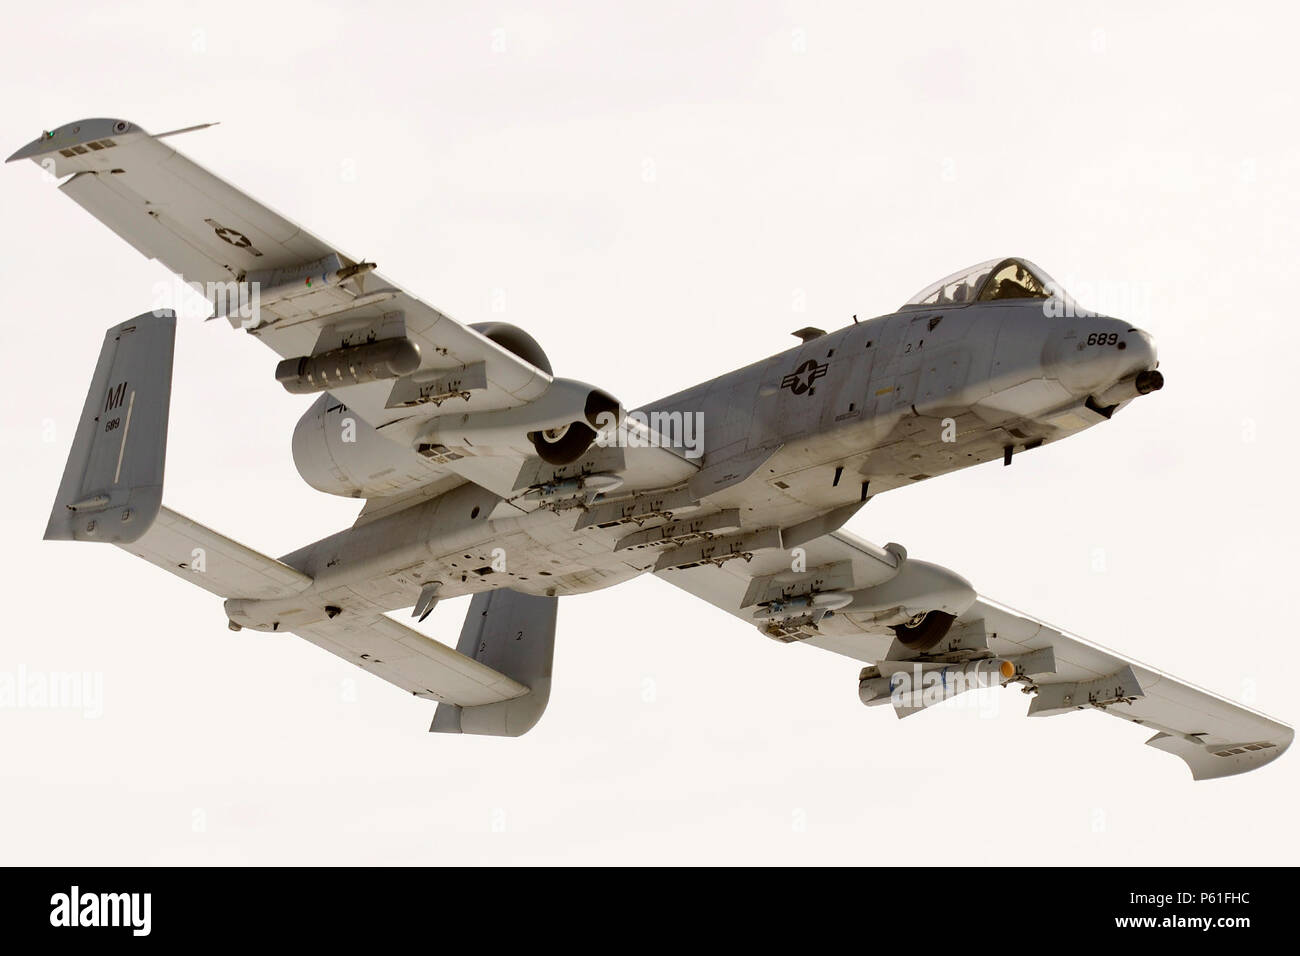 An A-10 Thunderbolt II engages in training mission at the Grayling Aerial Gunnery Range near Waters, Mich., April 7, 2016. The A-10 is operated by the 107th Fighter Squadron of the Michigan Air National Guard and are based at Selfridge Air National Guard Base, Mich. (U.S. Air National Guard photo by Master Sgt. David Kujawa) Stock Photo